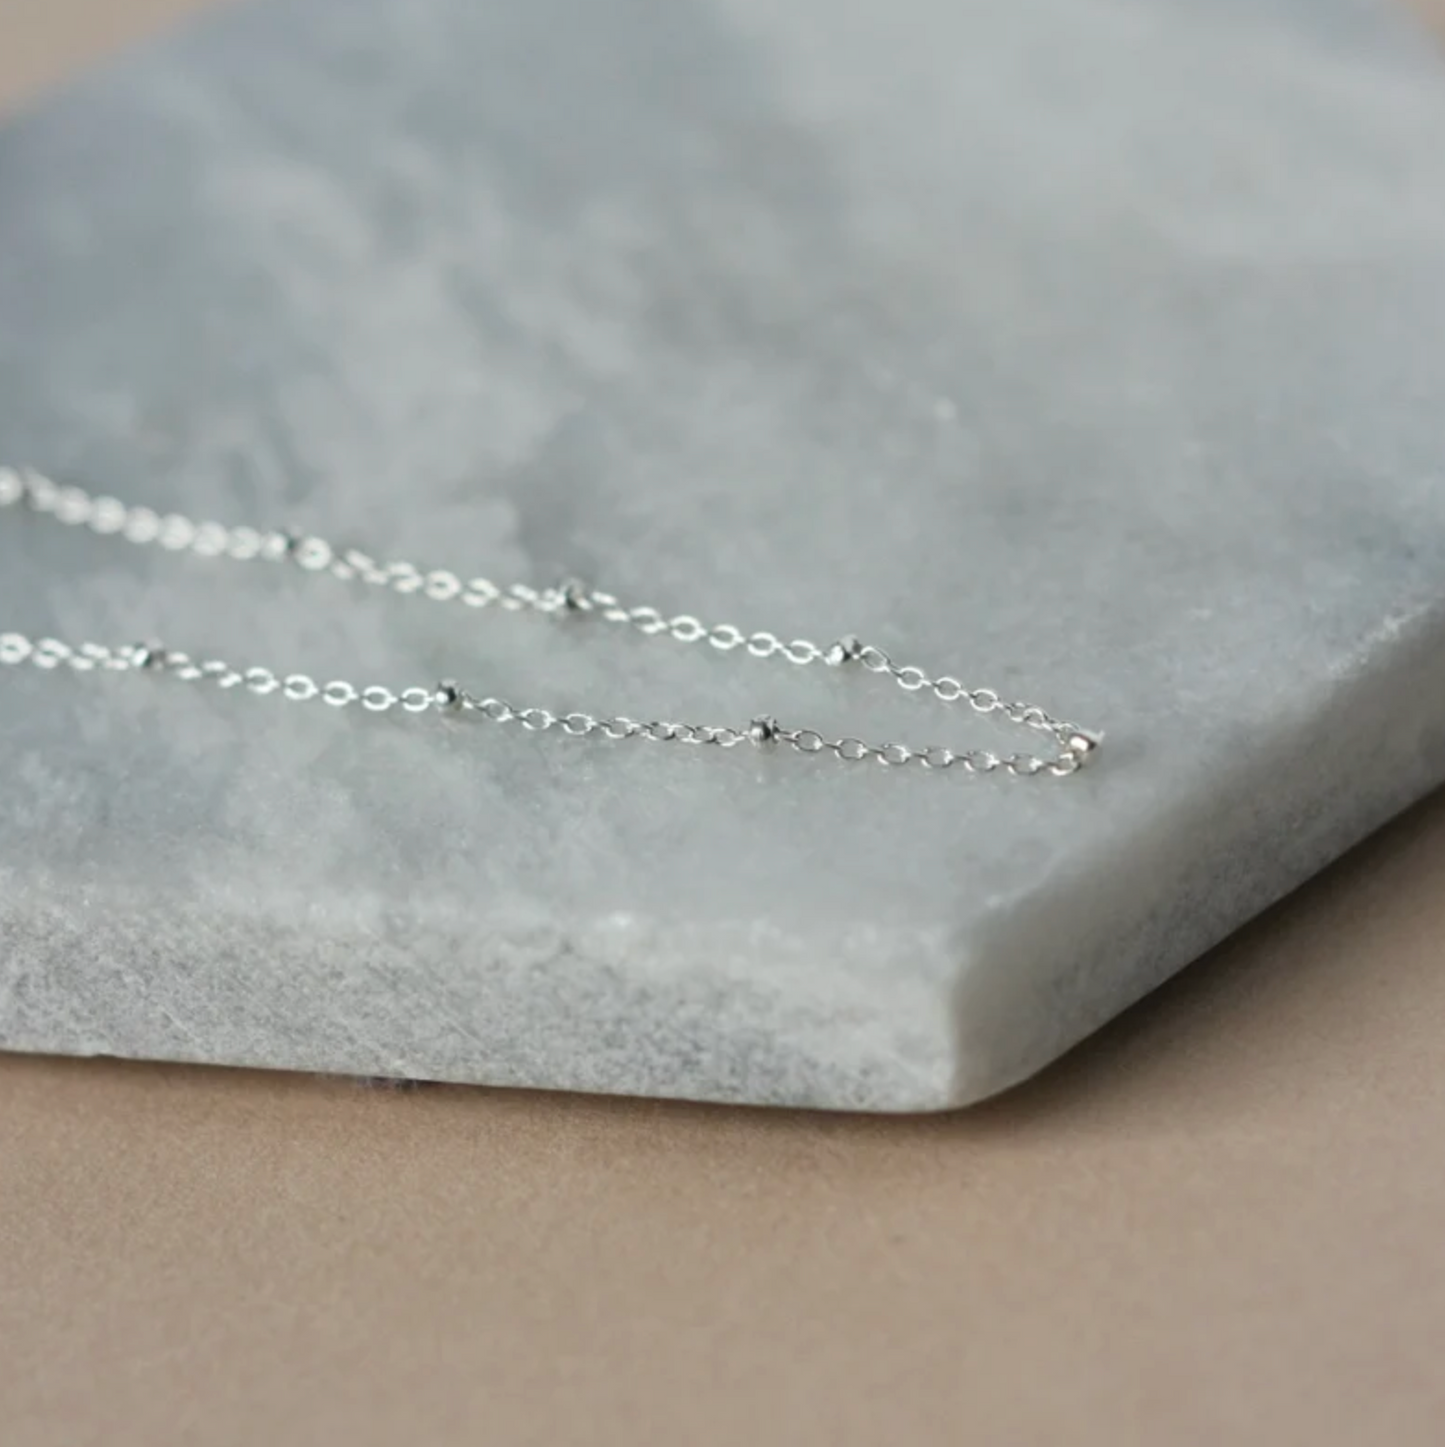 Dainty Sterling Silver Satellite Chain